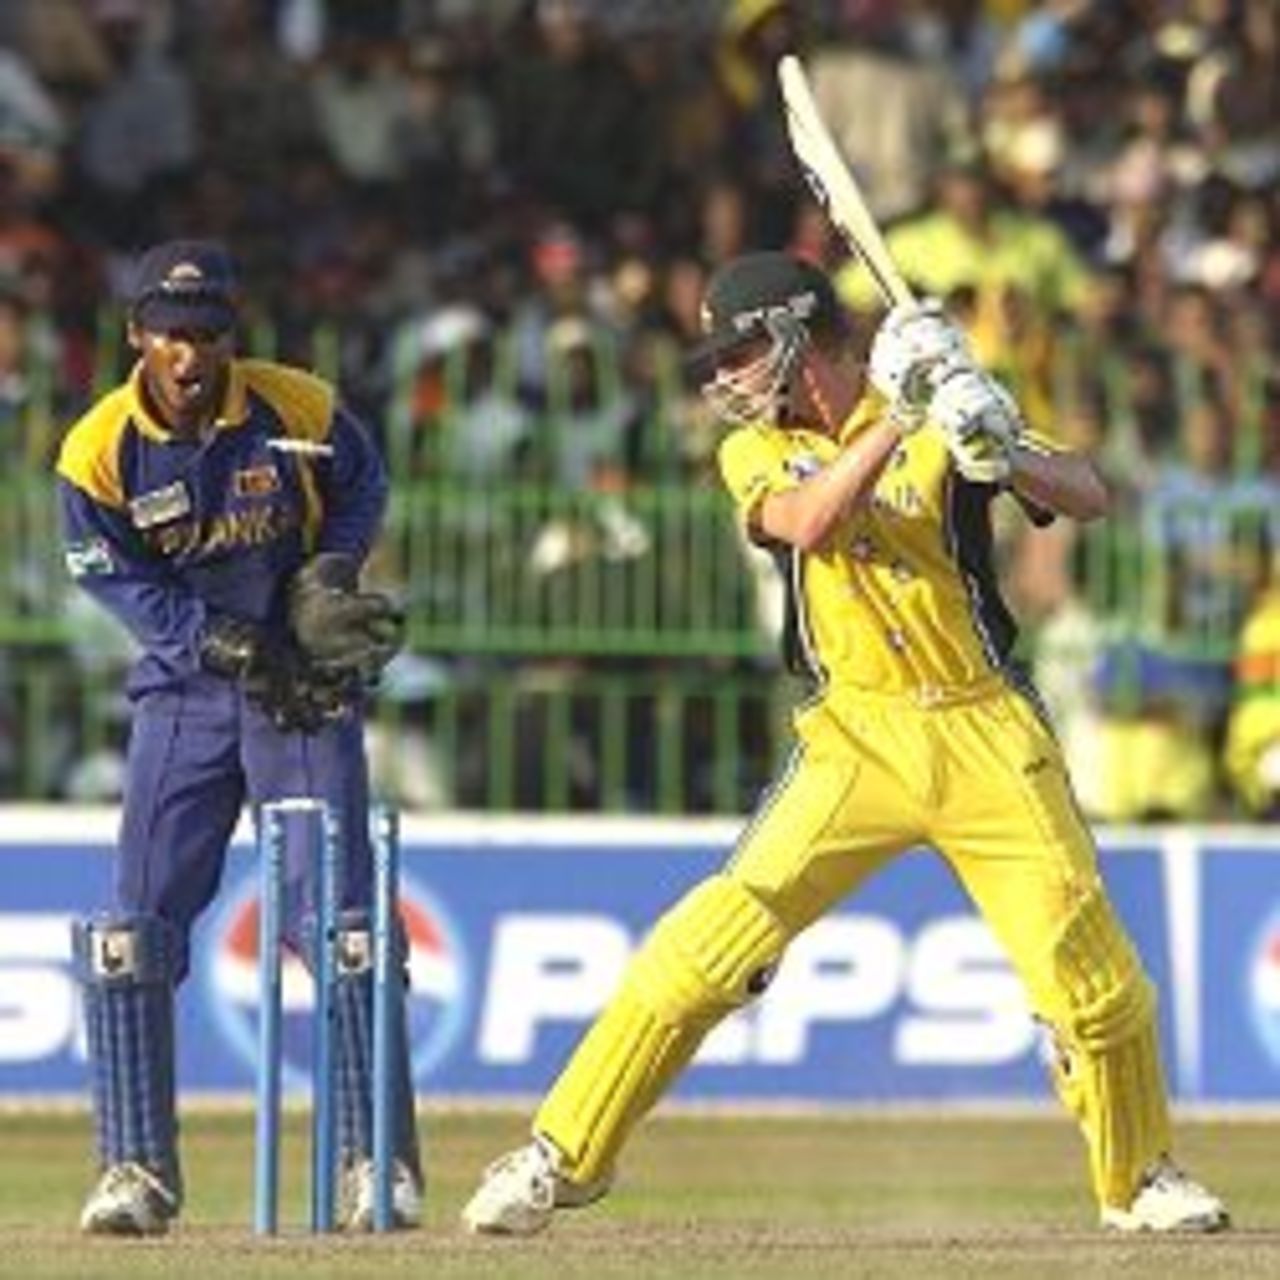 COLOMBO - SEPTEMBER 27: Brett Lee of Australia is bowled out during the Australia v Sri Lanka Semi Final match of the ICC Champions Trophy at the R. Premadasa Stadium, Colombo, Sri Lanka on September 27, 2002.